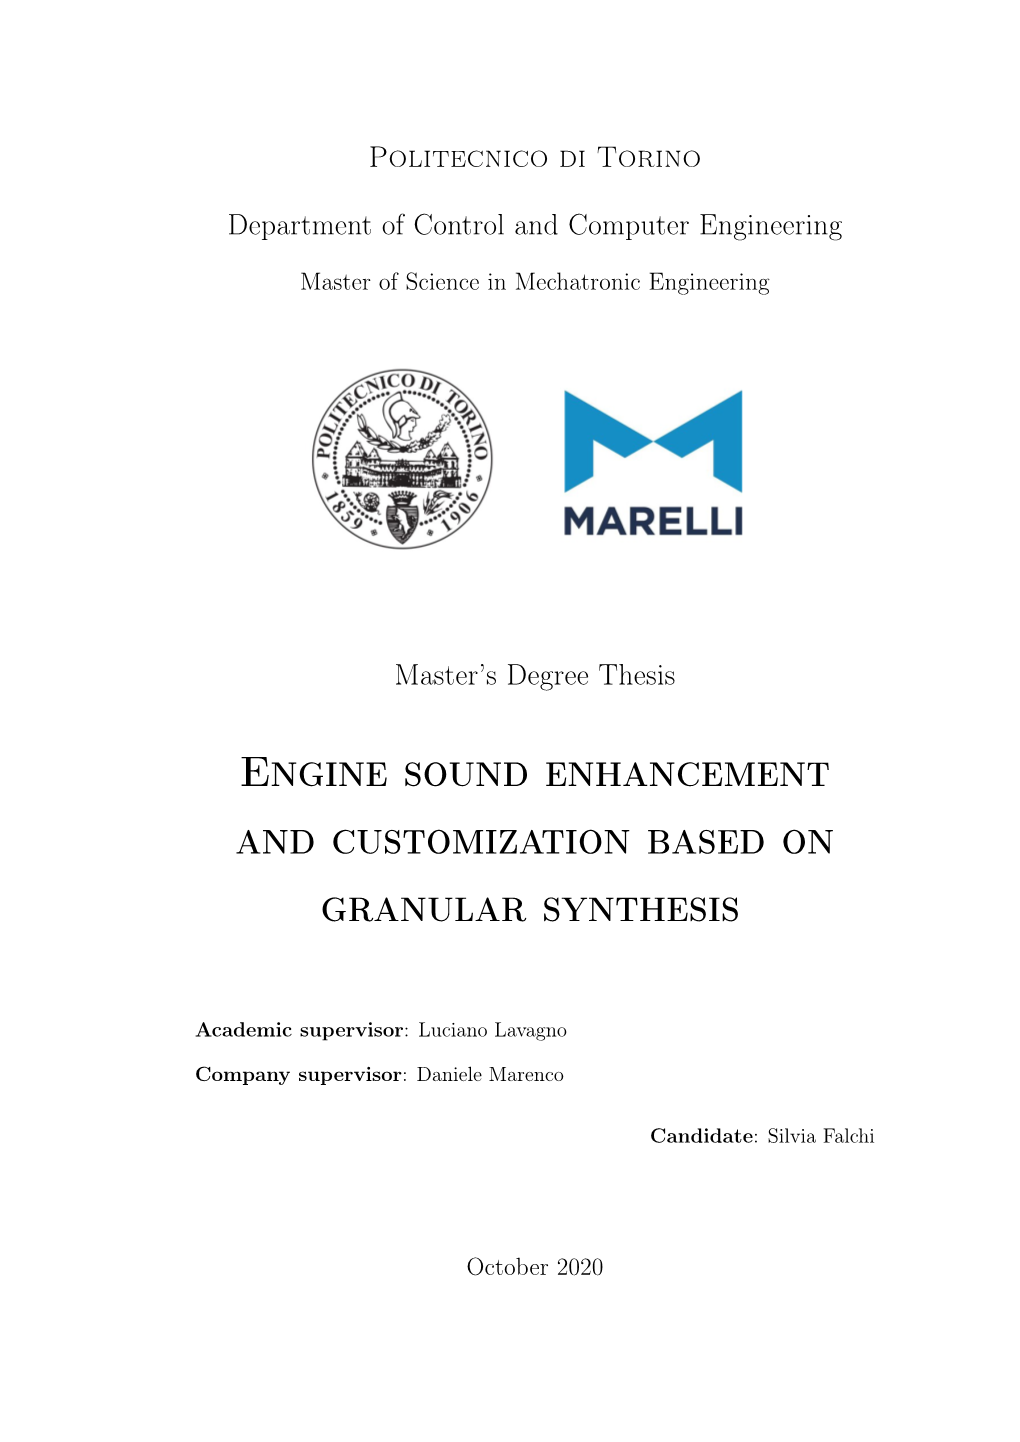 Engine Sound Enhancement and Customization Based on Granular Synthesis